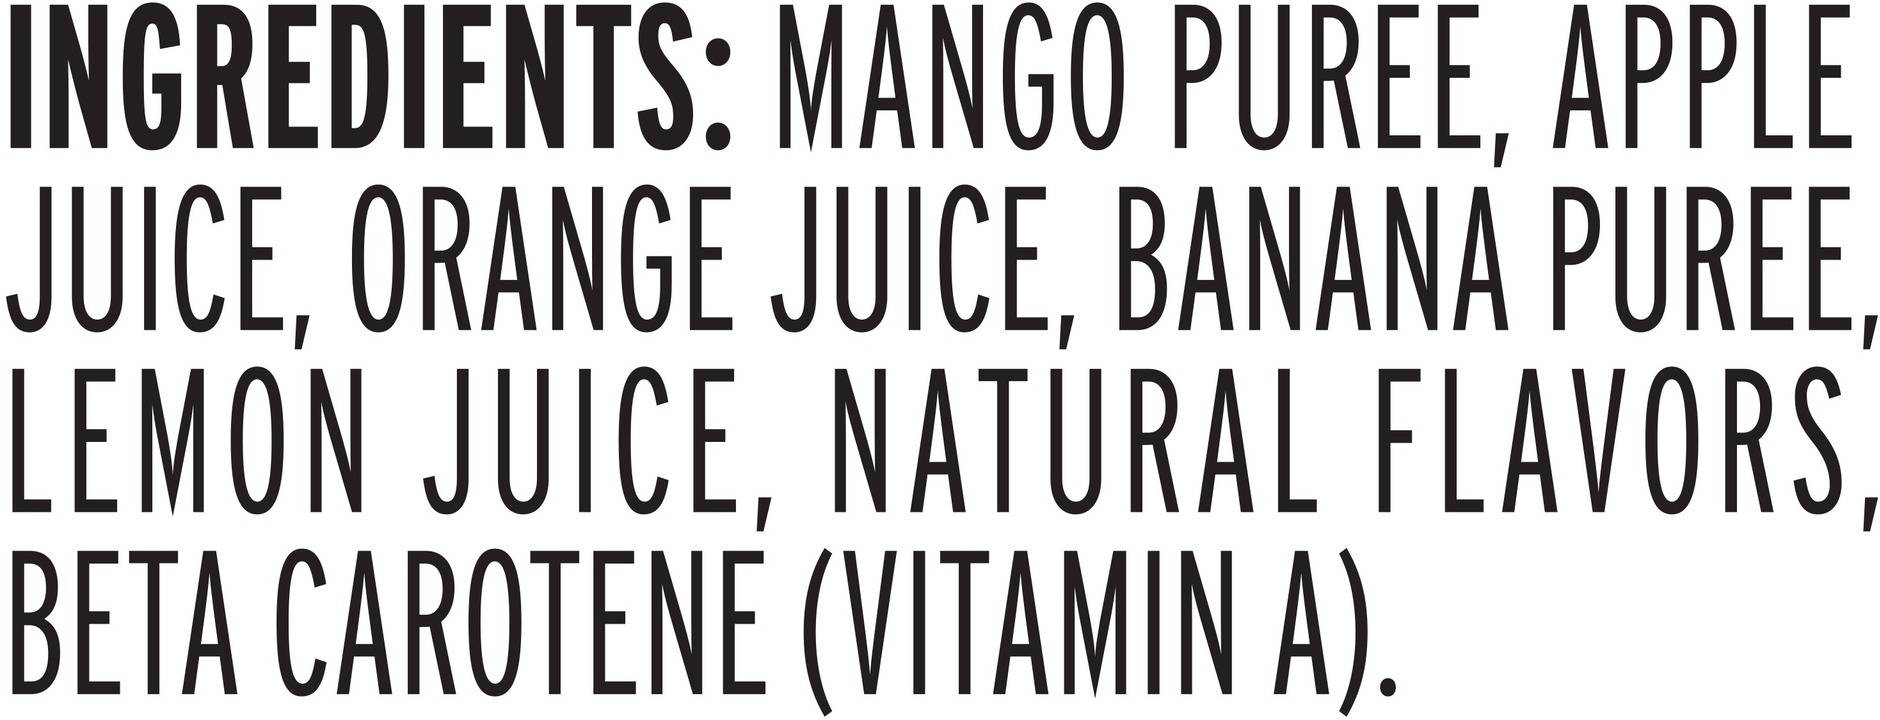 Image describing nutrition information for product Naked Juice Mighty Mango